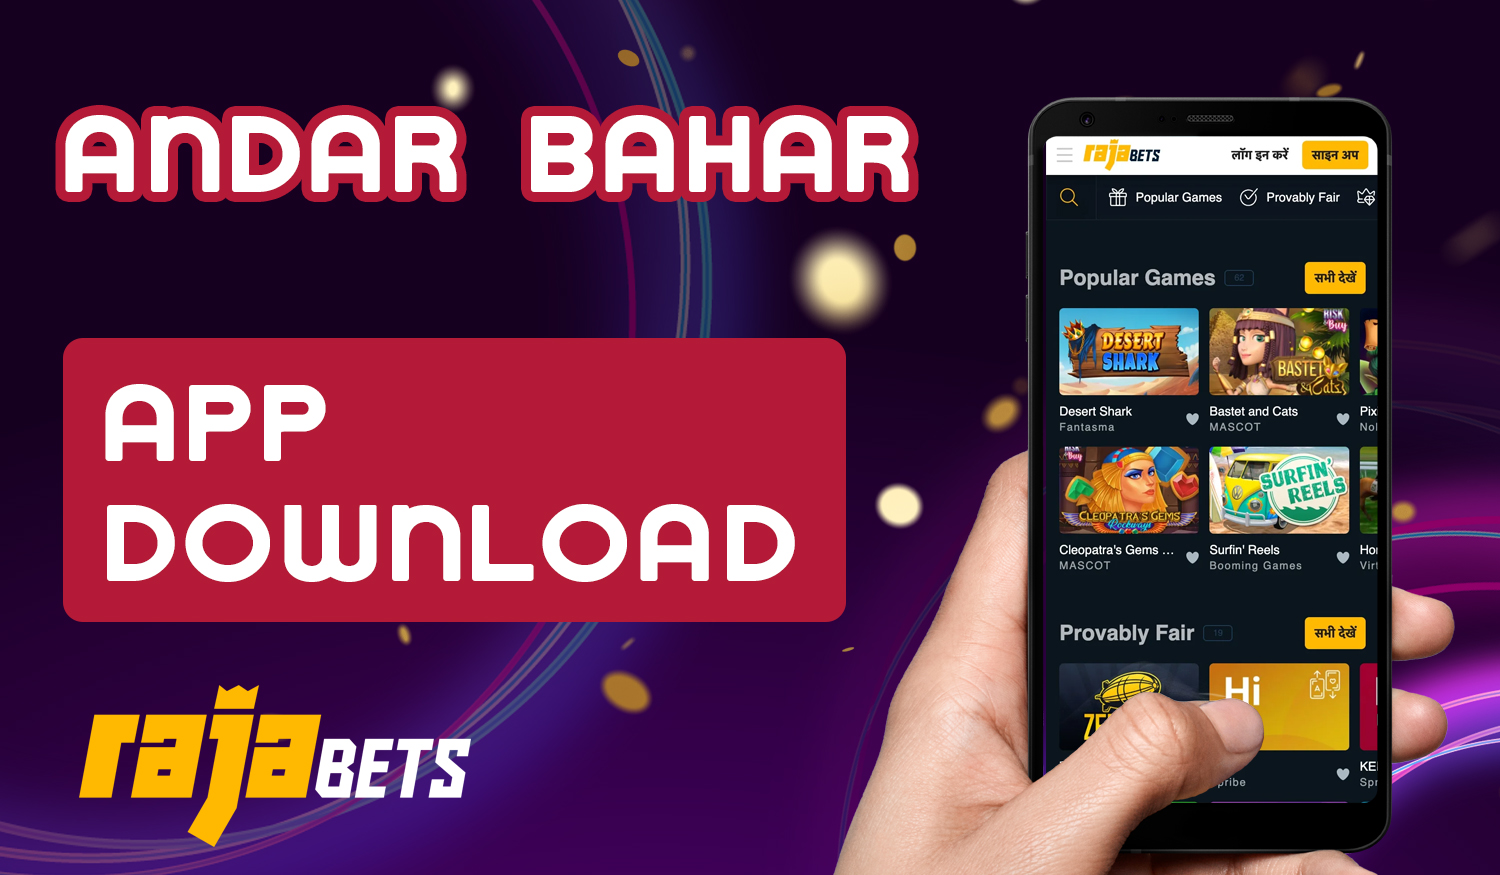 Instructions for Andar Bahar from India players on how to download and install the Rajabets mobile app